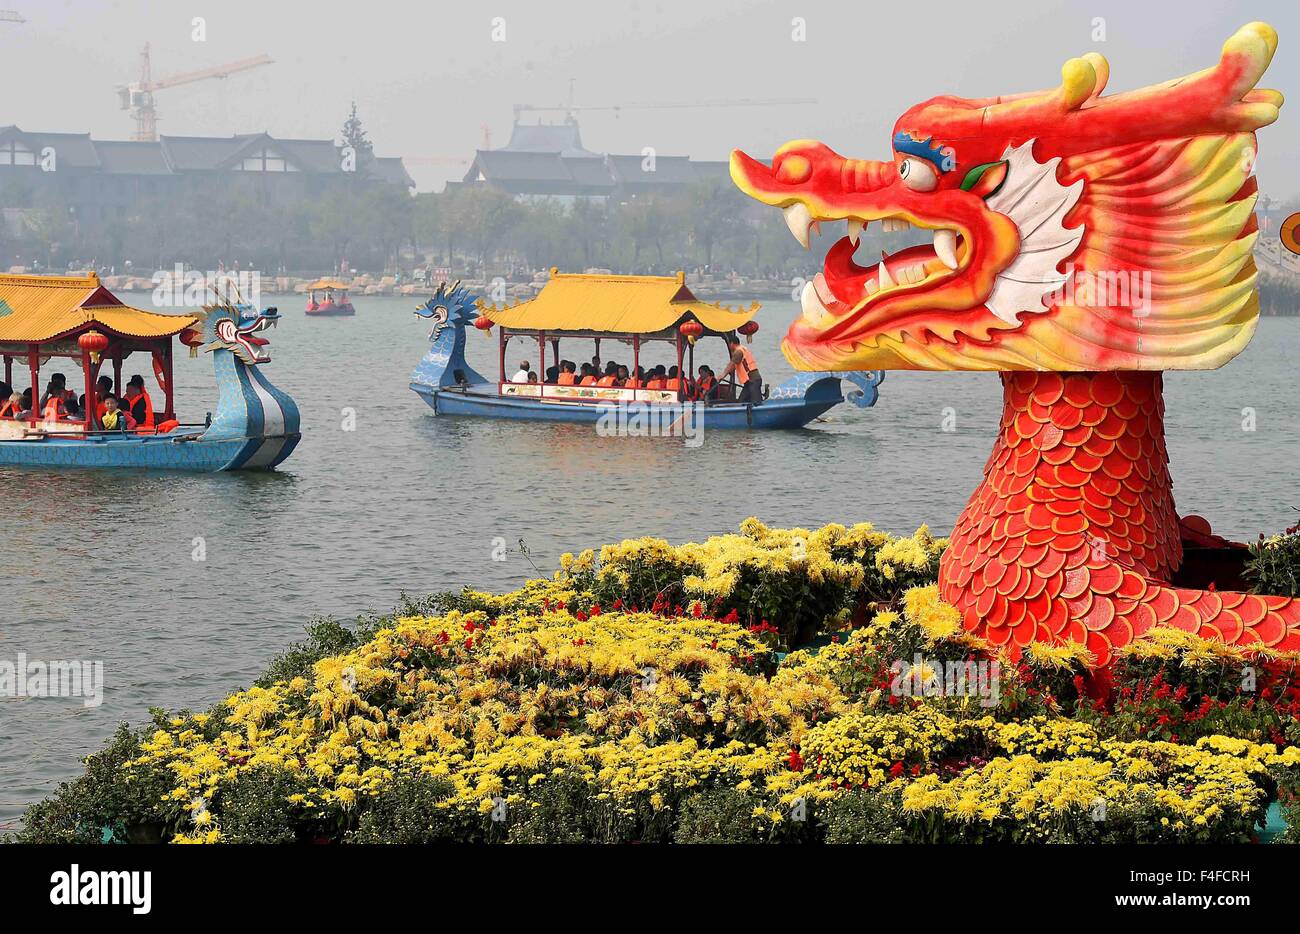 Kaifeng. 17th Oct, 2015. Photo taken on Oct. 17, 2015 shows chrysanthemums displayed in Kaifeng, central China's Henan Province. About 2.05 million pots of chrysanthemum in the city bursted into bloom recently. © Li An/Xinhua/Alamy Live News Stock Photo